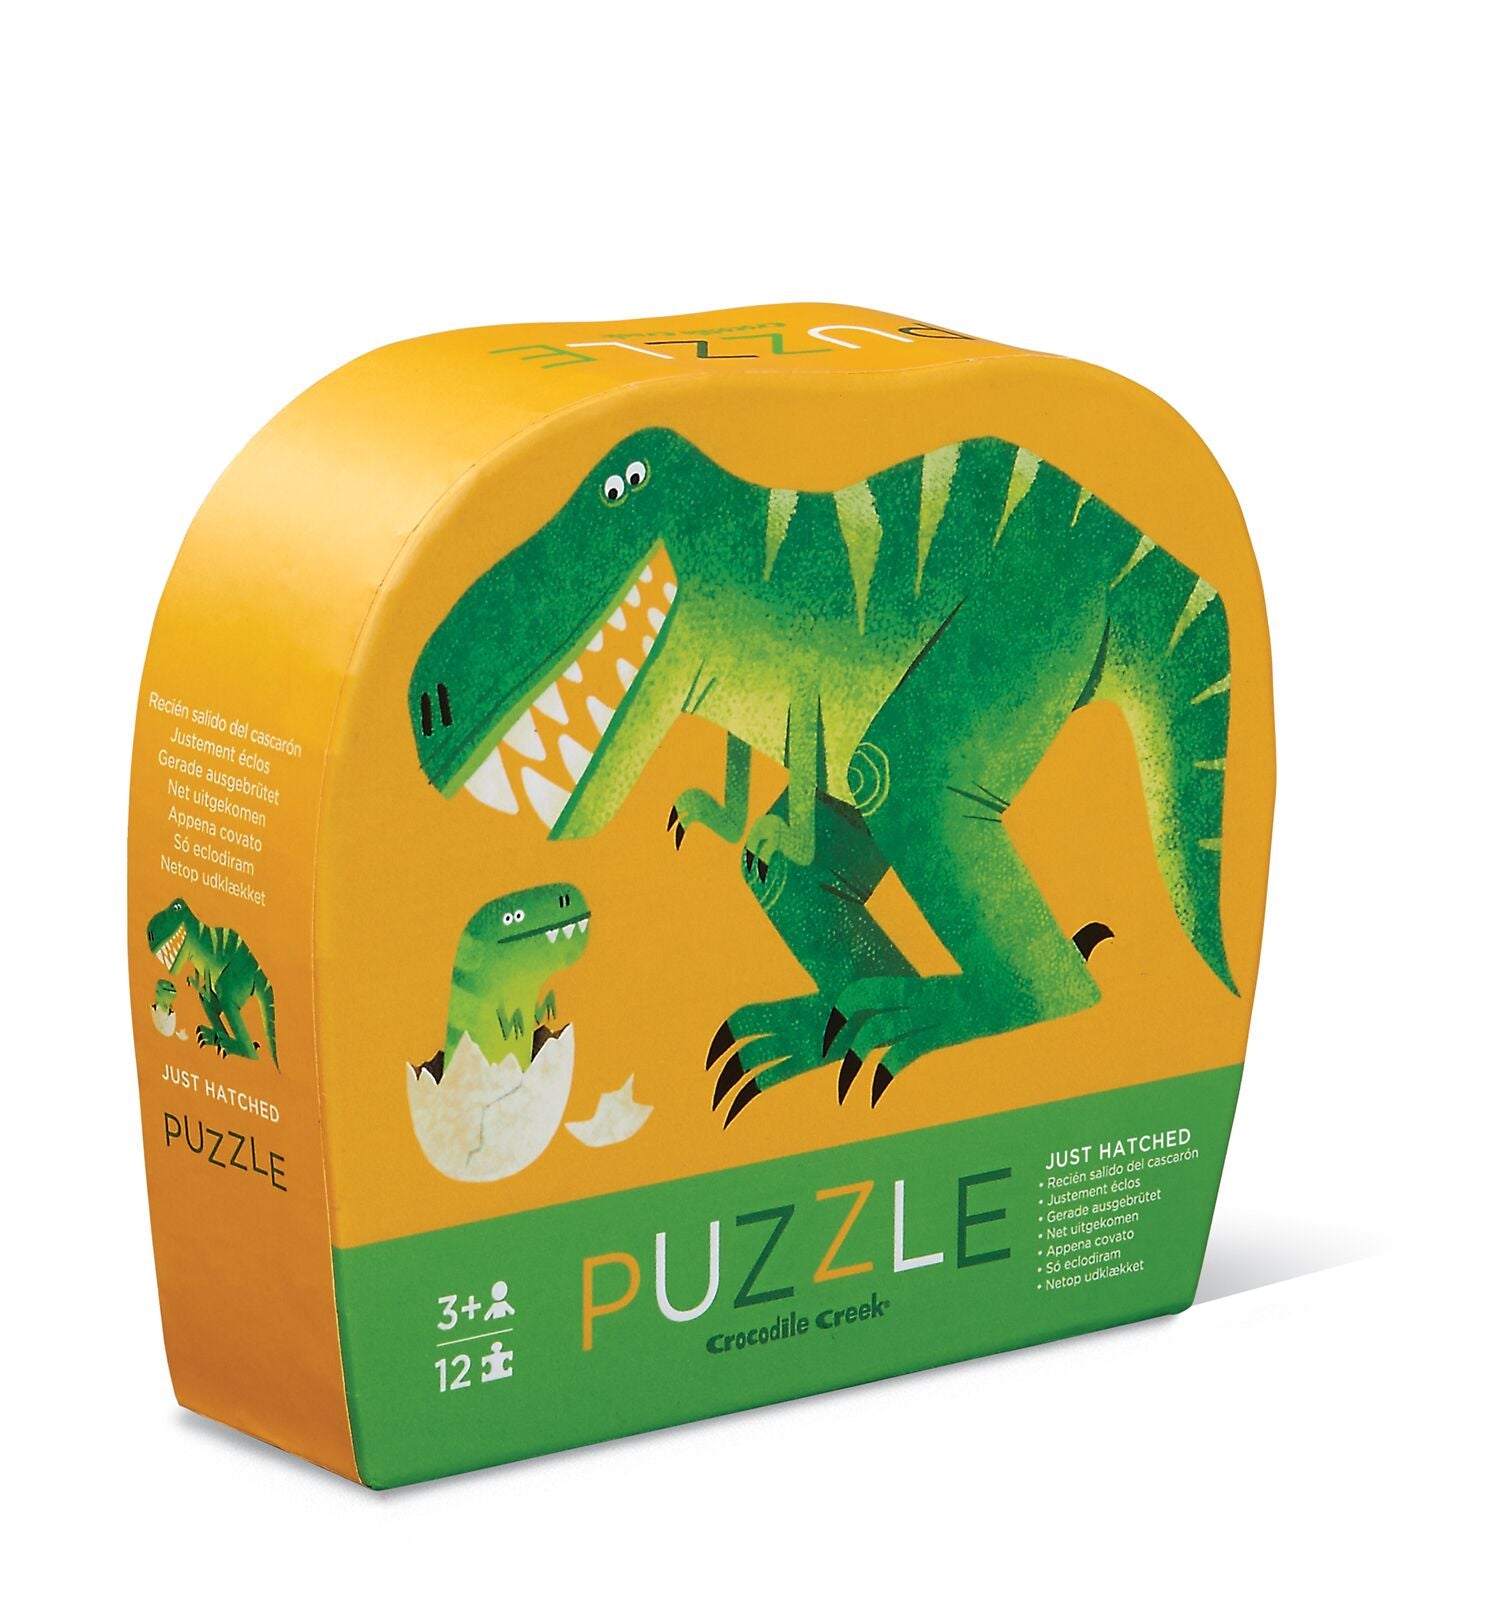 Crocodile Creek Mini SHaped Puzzle Just Hatched 12pc quality puzzle for kids eco friendly The Toy Wagon